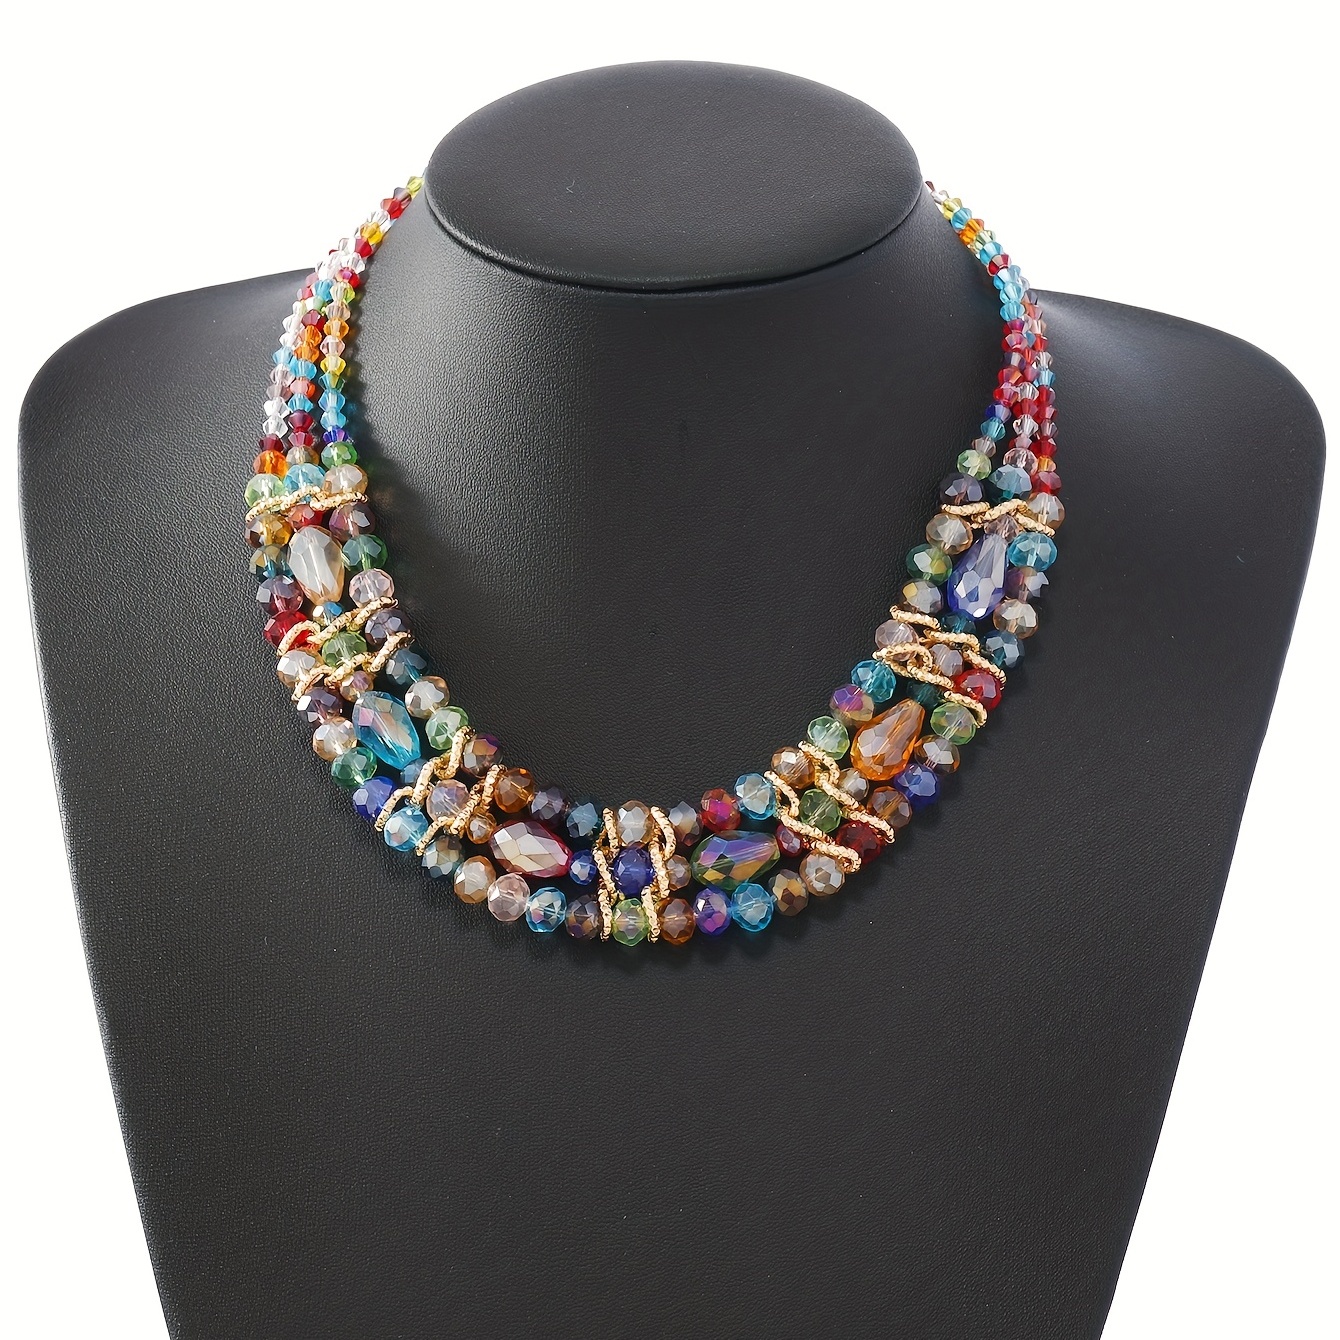 

Bohemian Multilayer 3 Rows Crystal Colorful Drip Necklace Fine Jewelry For Women Girls